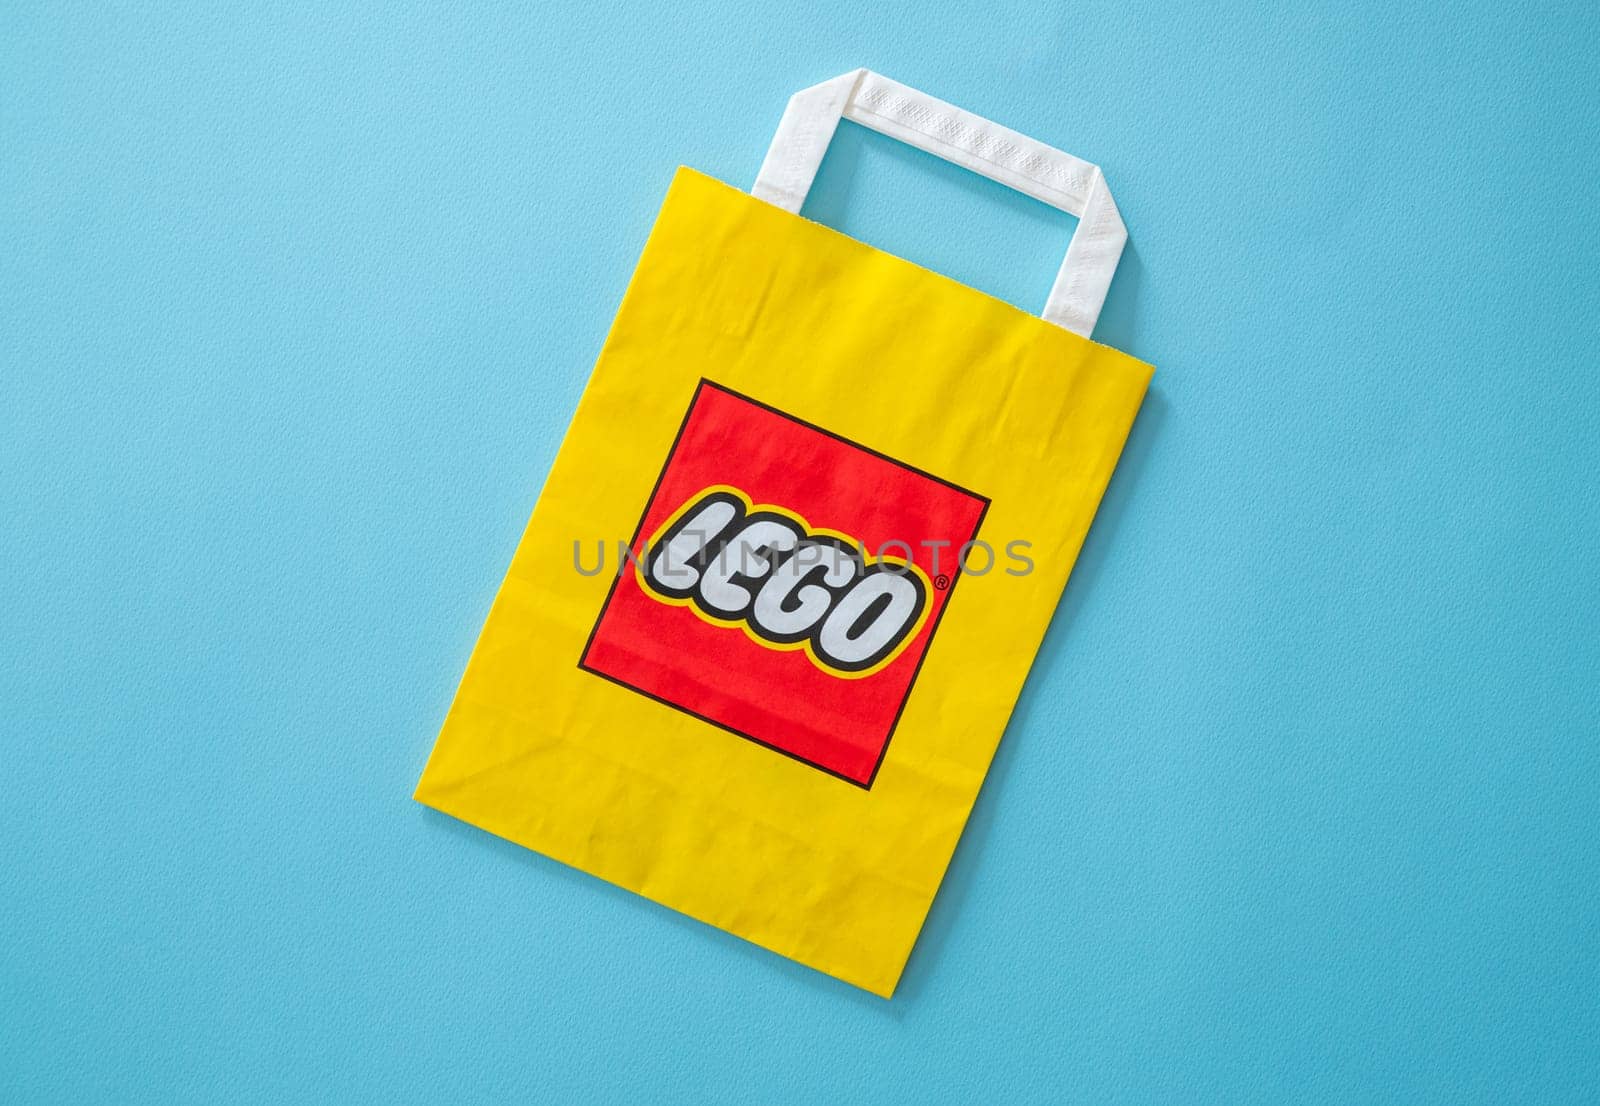 Antalya, Turkey - October 26, 2023: Branded yellow paper bag of Lego Group Corporation with logo by Sonat